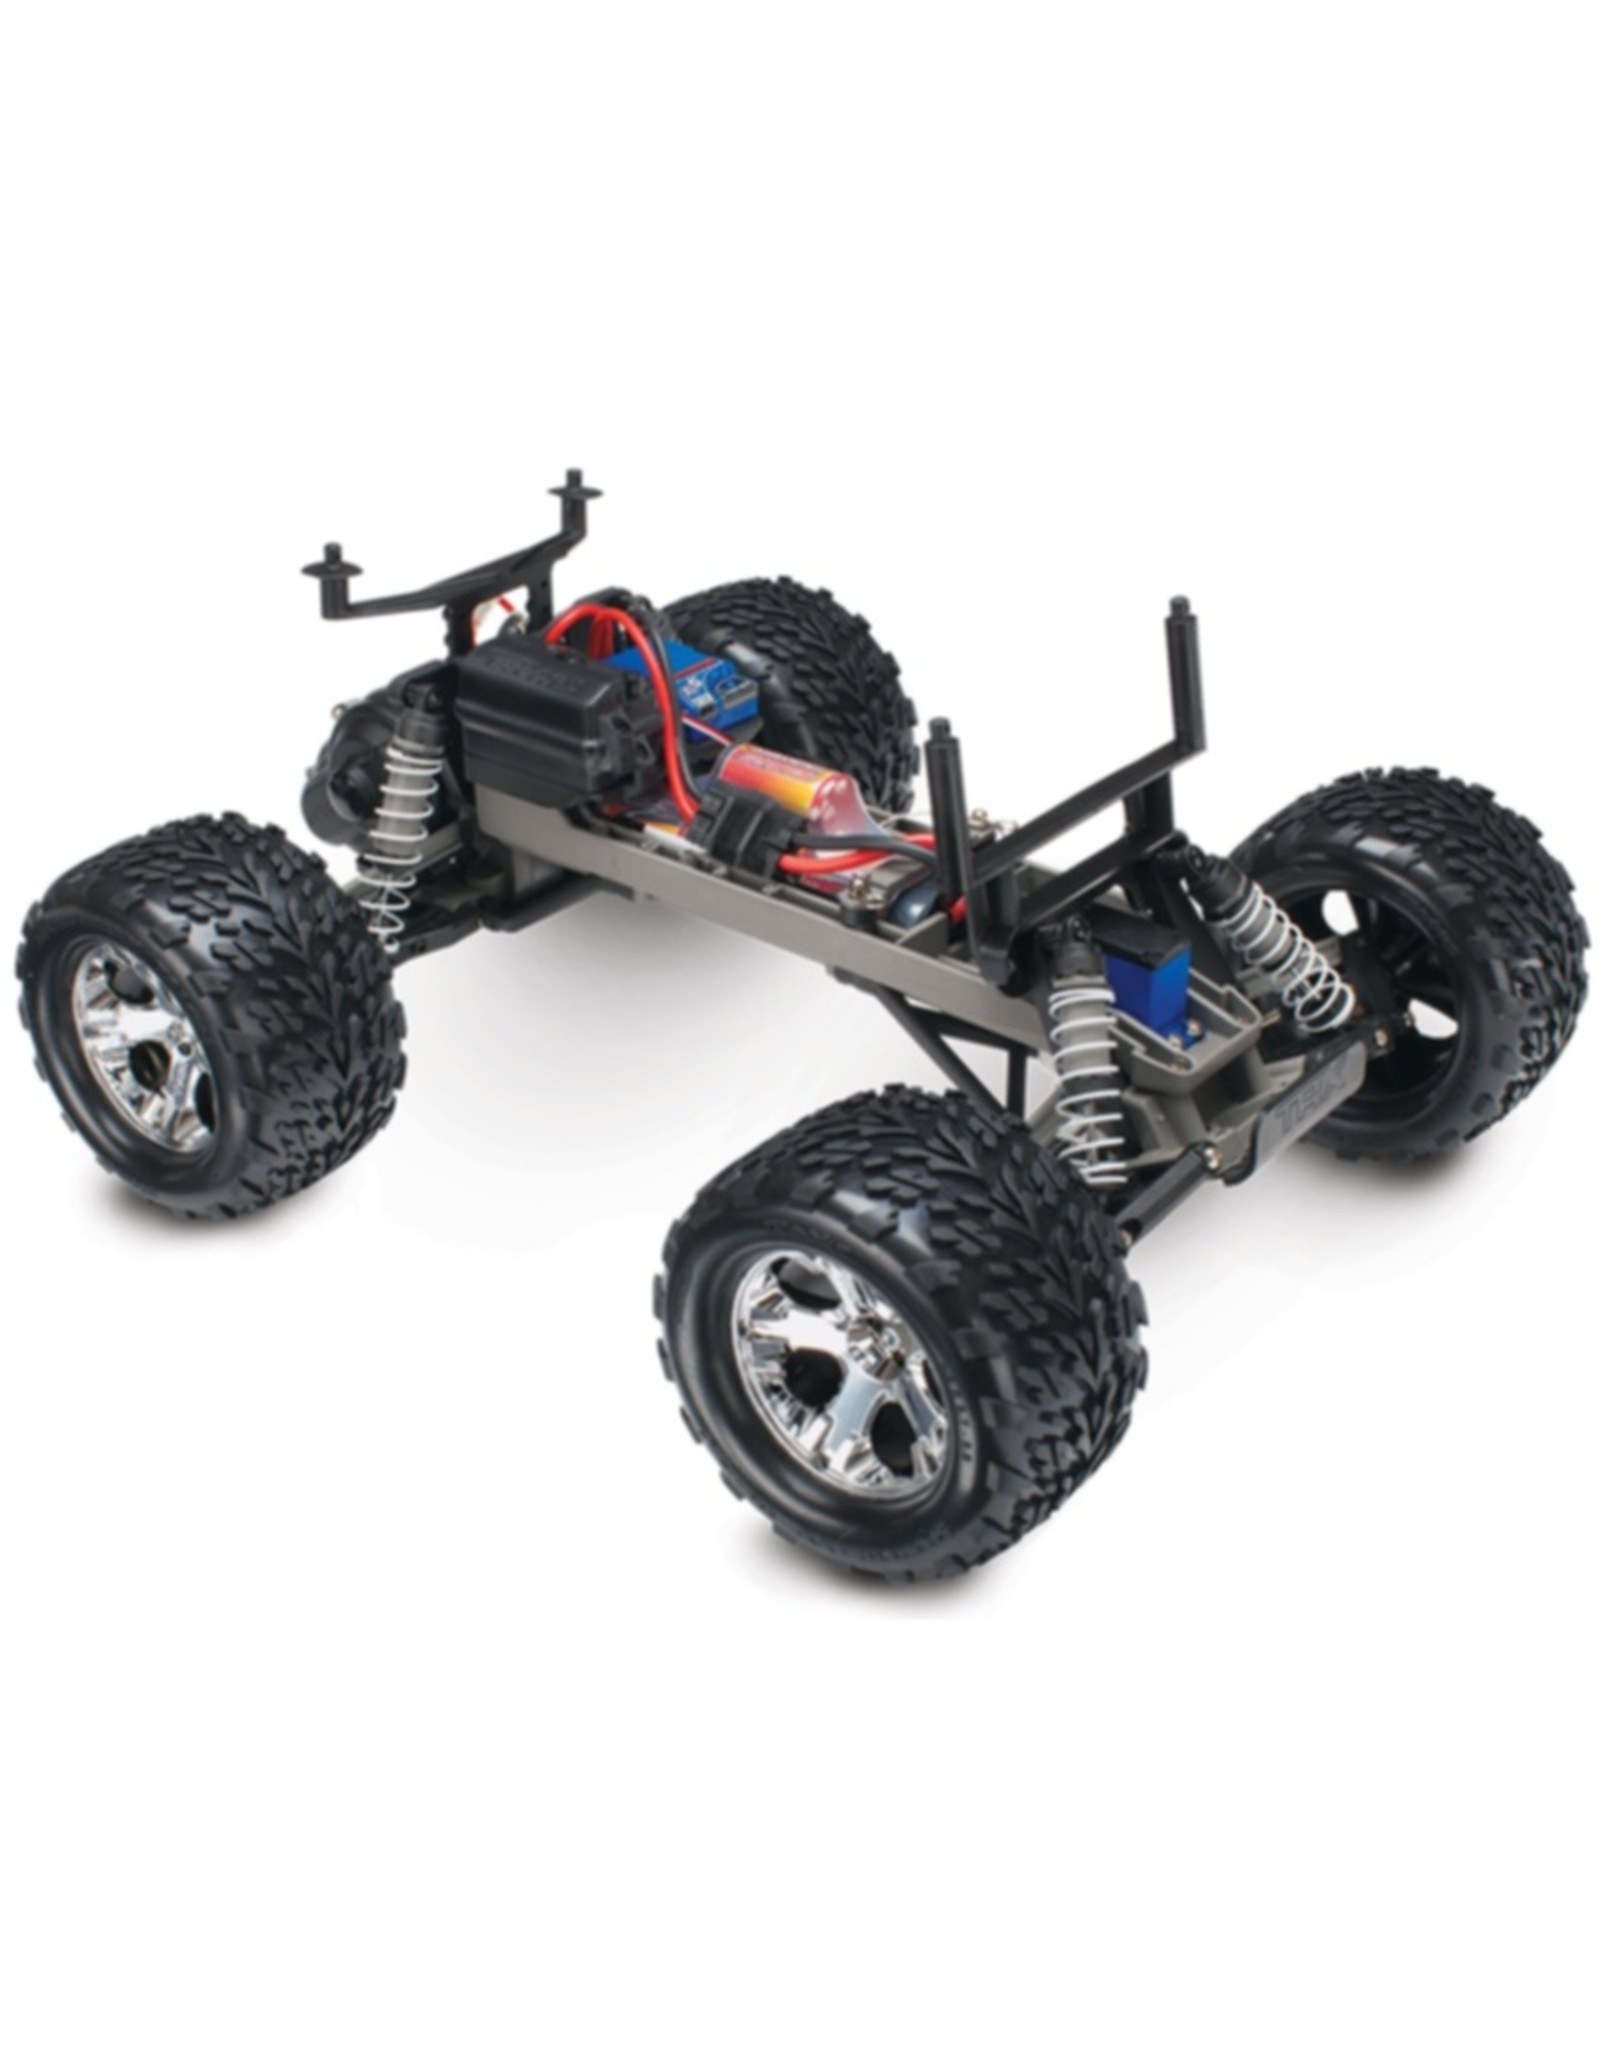 Traxxas TRA36054-1 GREEN Stampede : 1/10 Scale Monster Truck with TQ 2.4GHz radio system